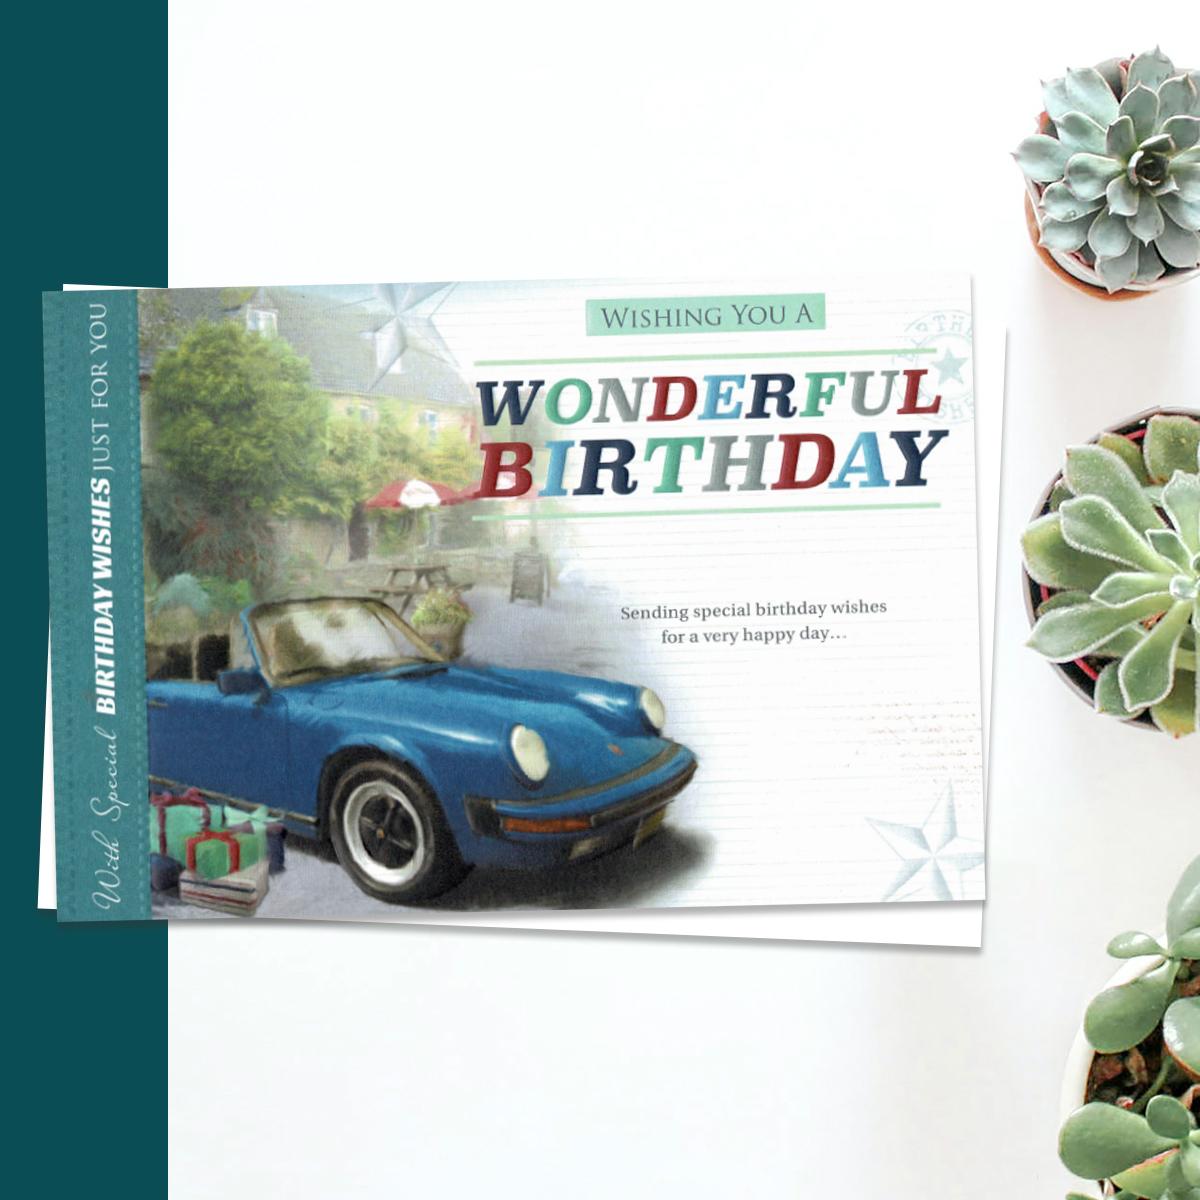 Wishing You A Wonderful Birthday Embossed Card Featuring A Blue Convertible Car. Complete With White Envelope